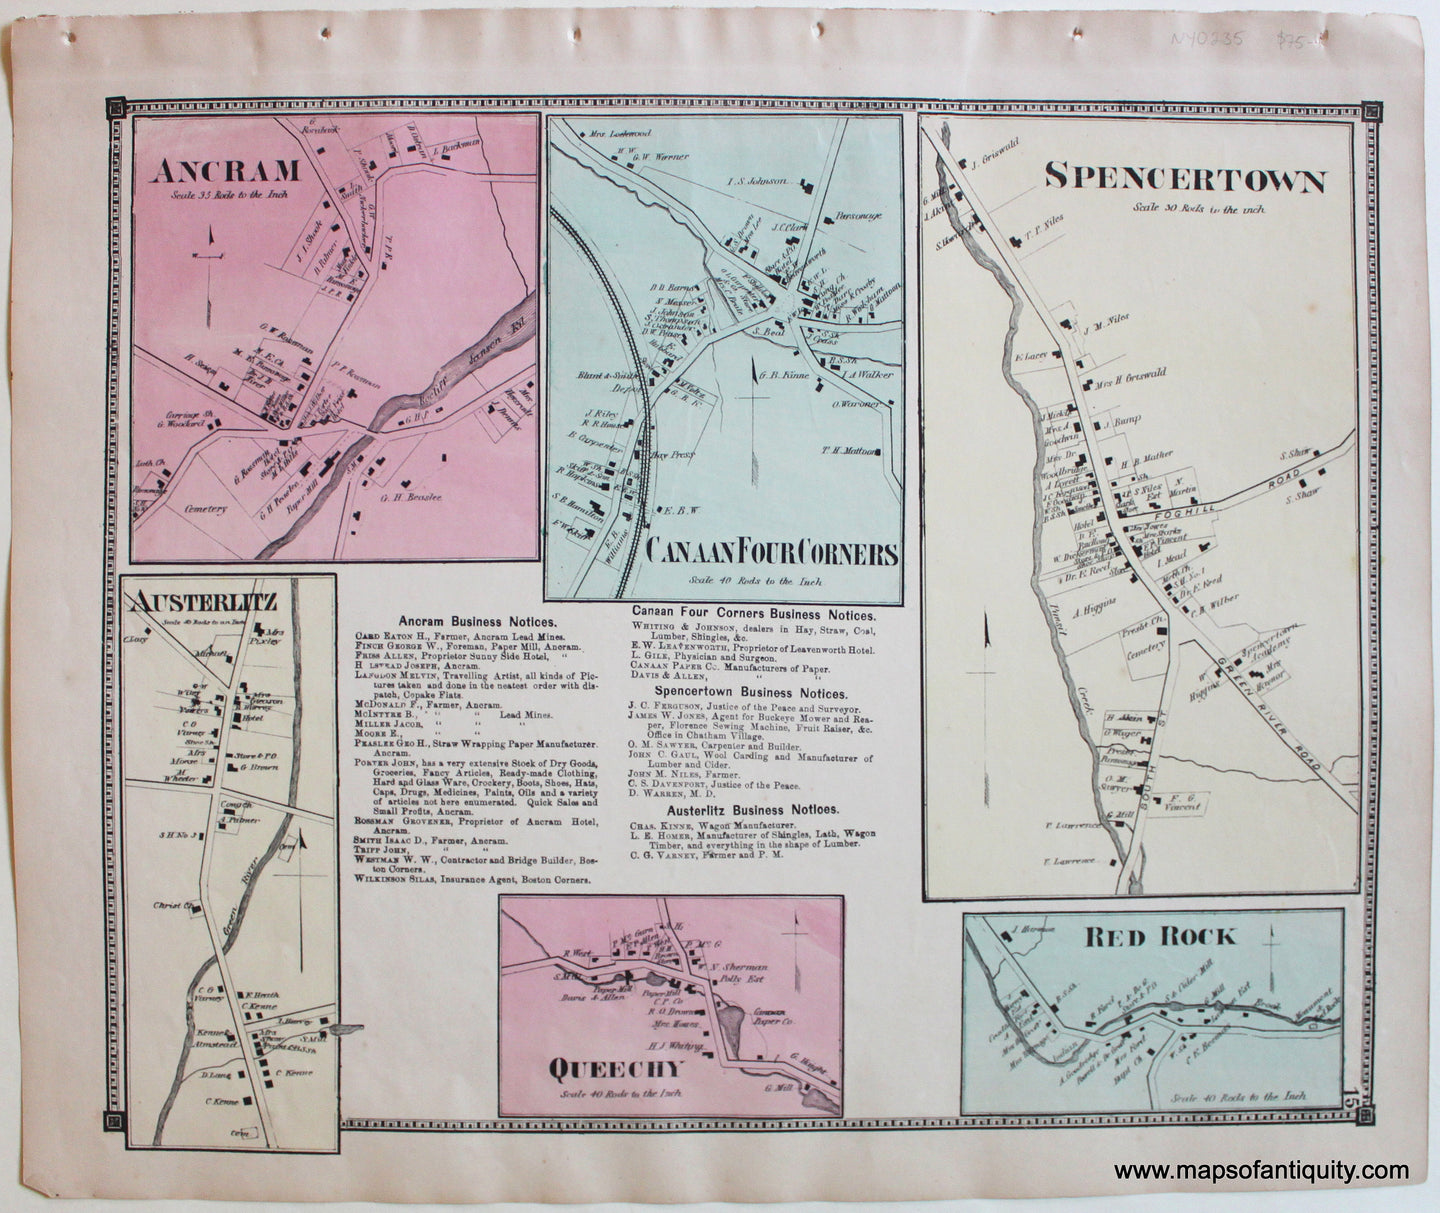 Antique-Map-Ancram-Austerlitz-Canaan-Four-Corners-Spencertown-Red-Rock-Queechy-town-centers-New-York-State-Beers-1873-Maps-of-Antiquity